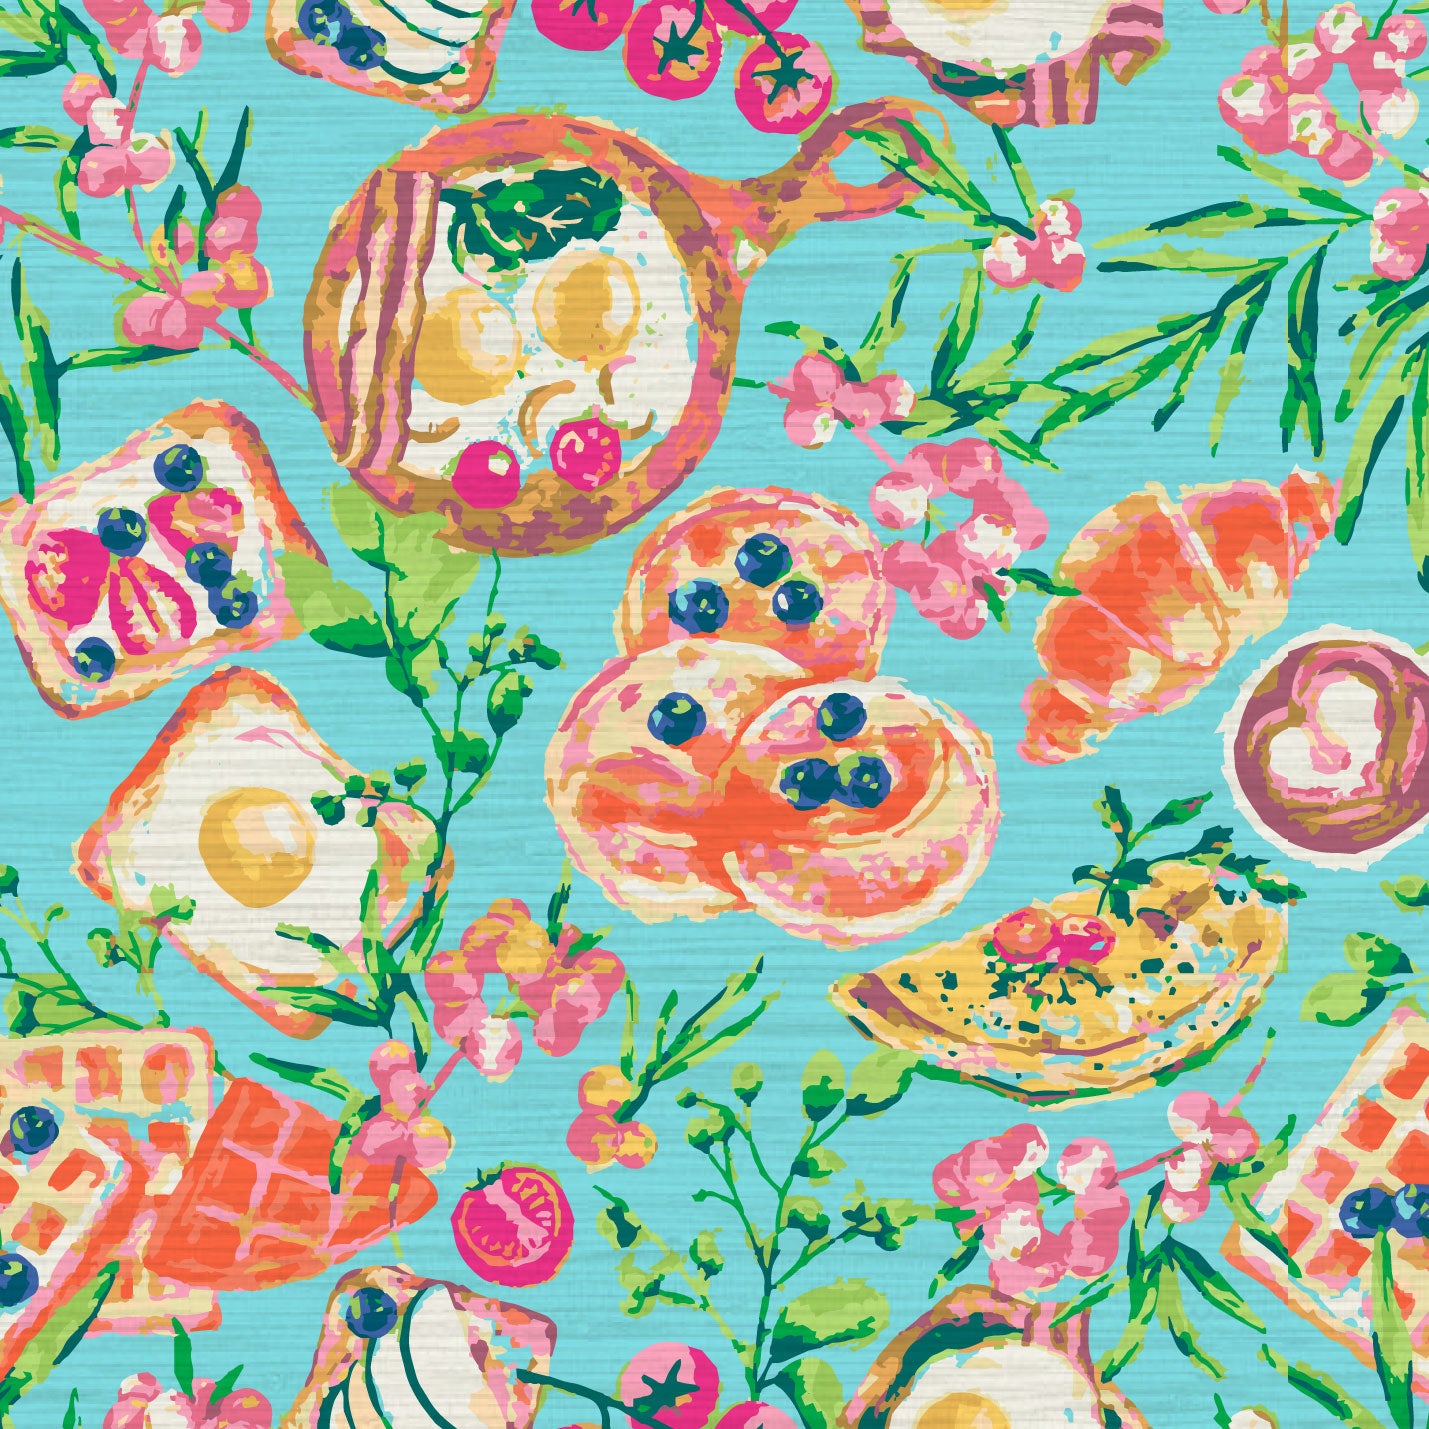 Load image into Gallery viewer, Printed grasscloth wallpaper featuring a variety of breakfast foods including: eggs, bacon, waffles, pancakes, toast with fresh fruit and vegetables along with scattered flowers in a tossed allover print.
